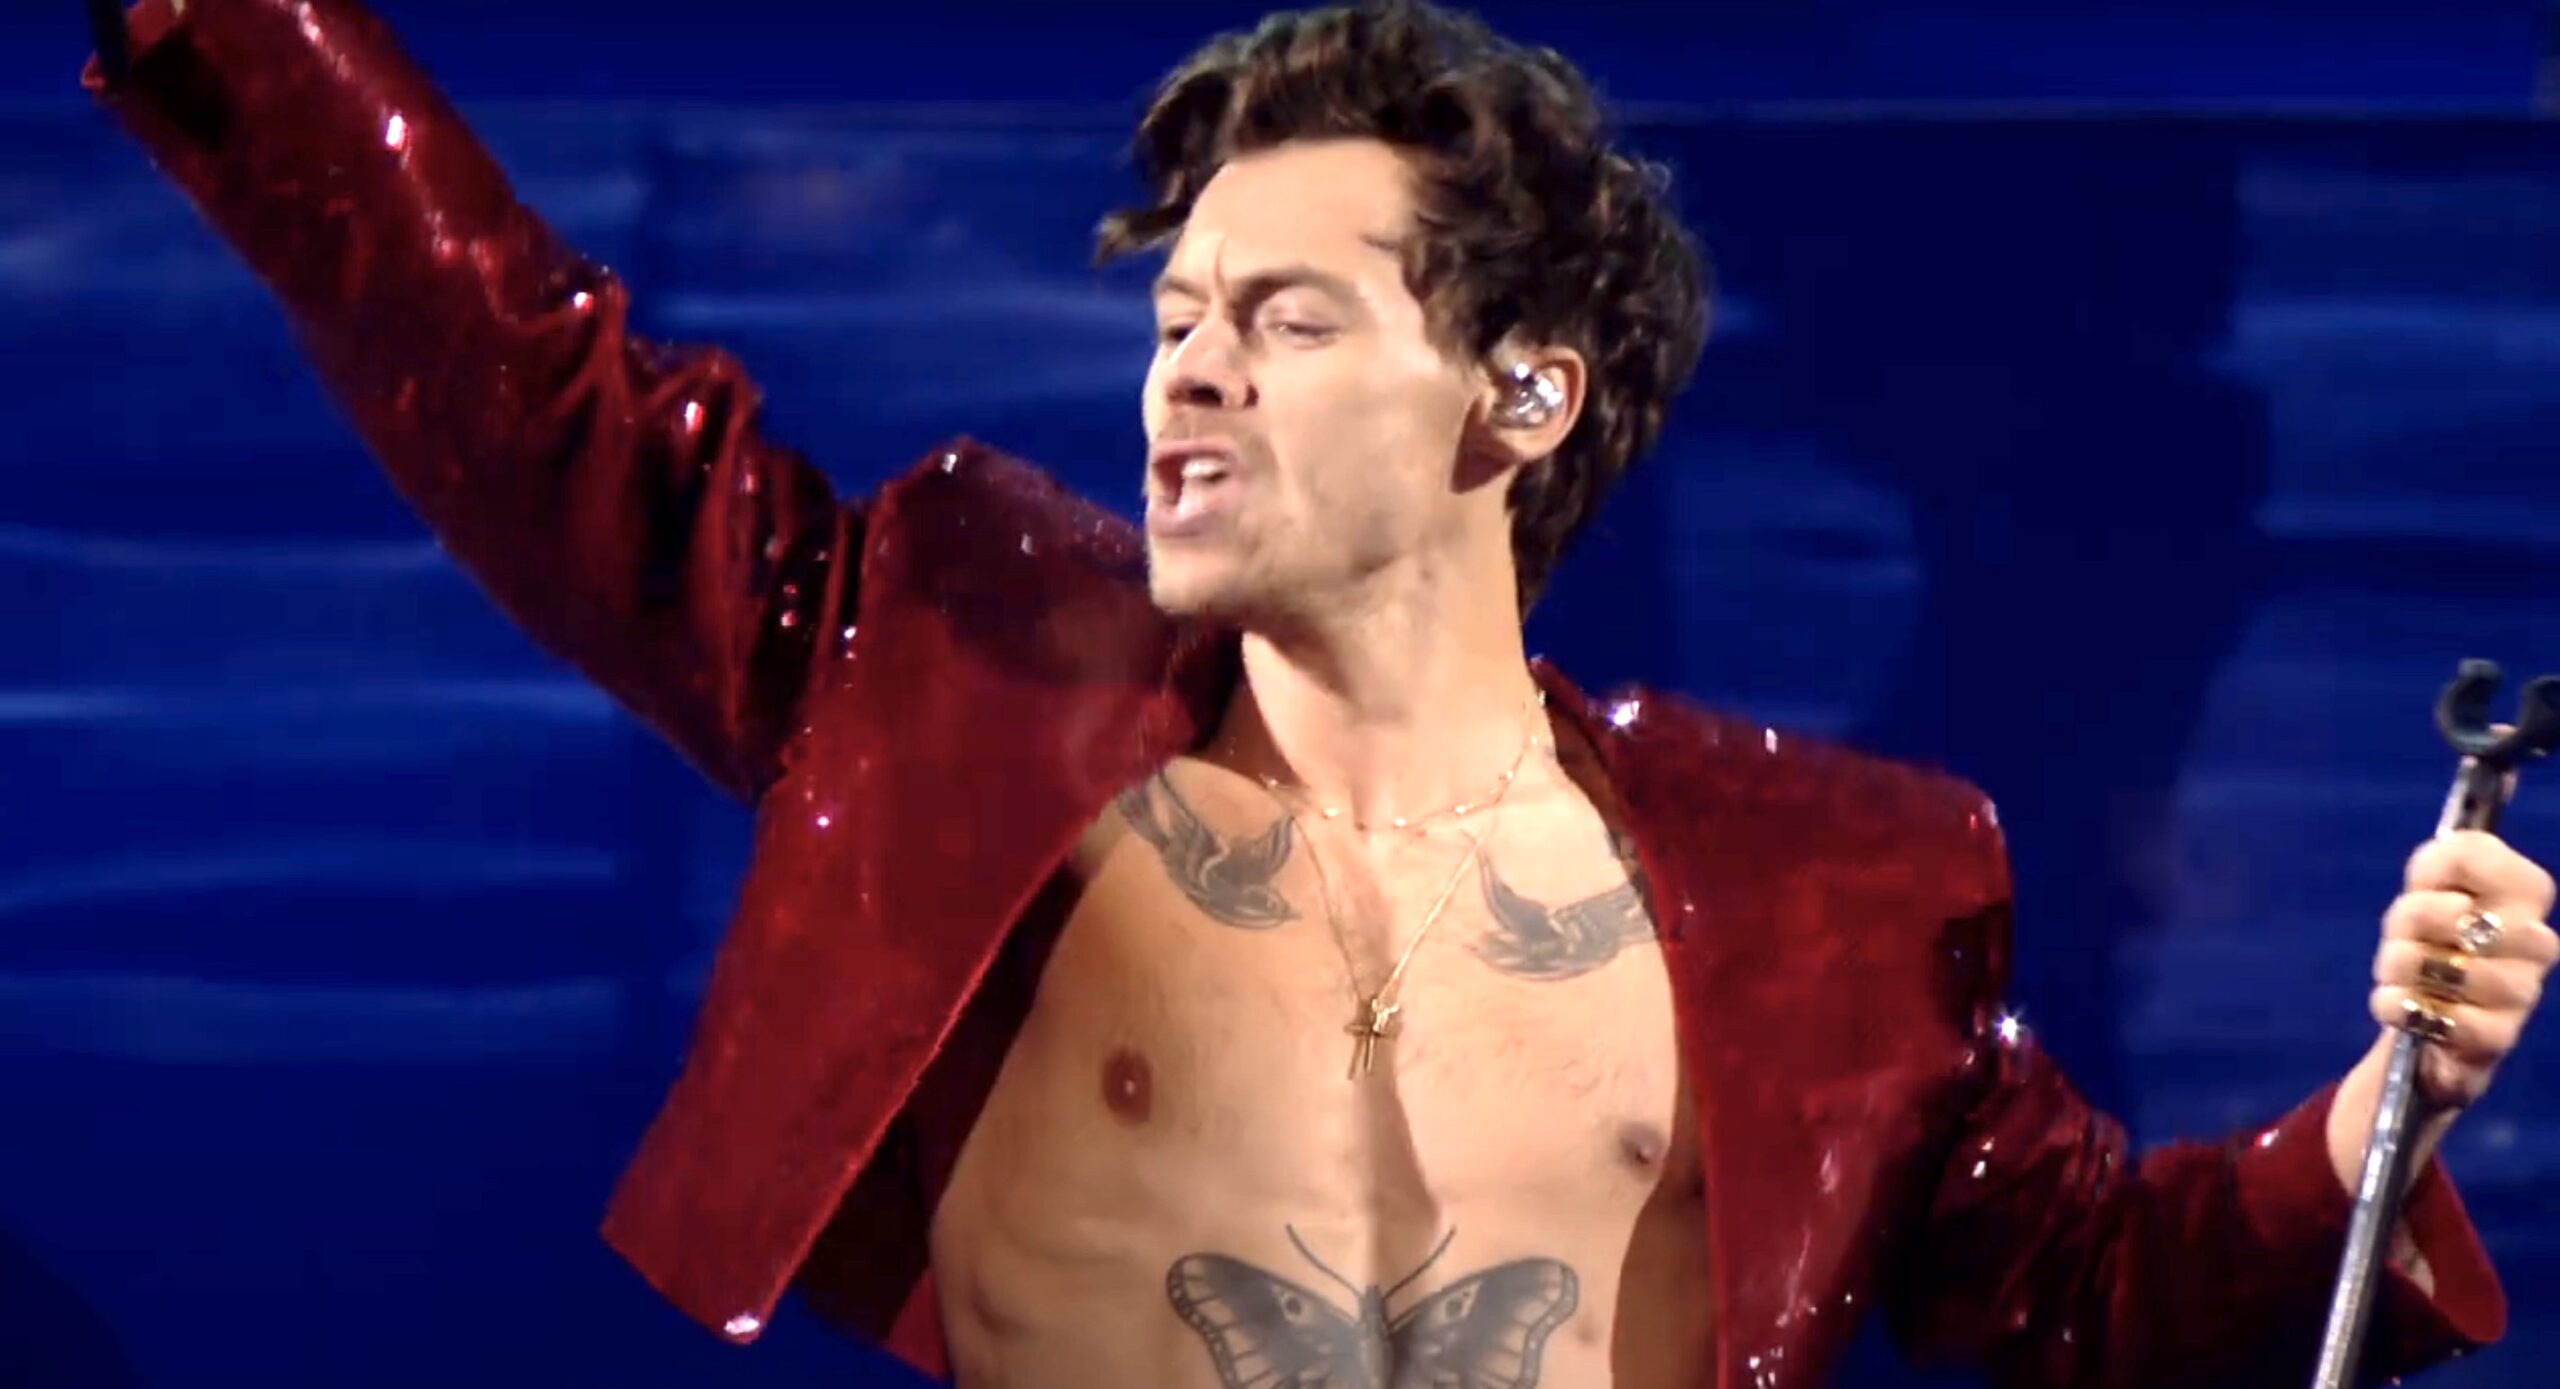 Harry Styles Rocks BRITs 2023 with 'As It Was' [Performance] That